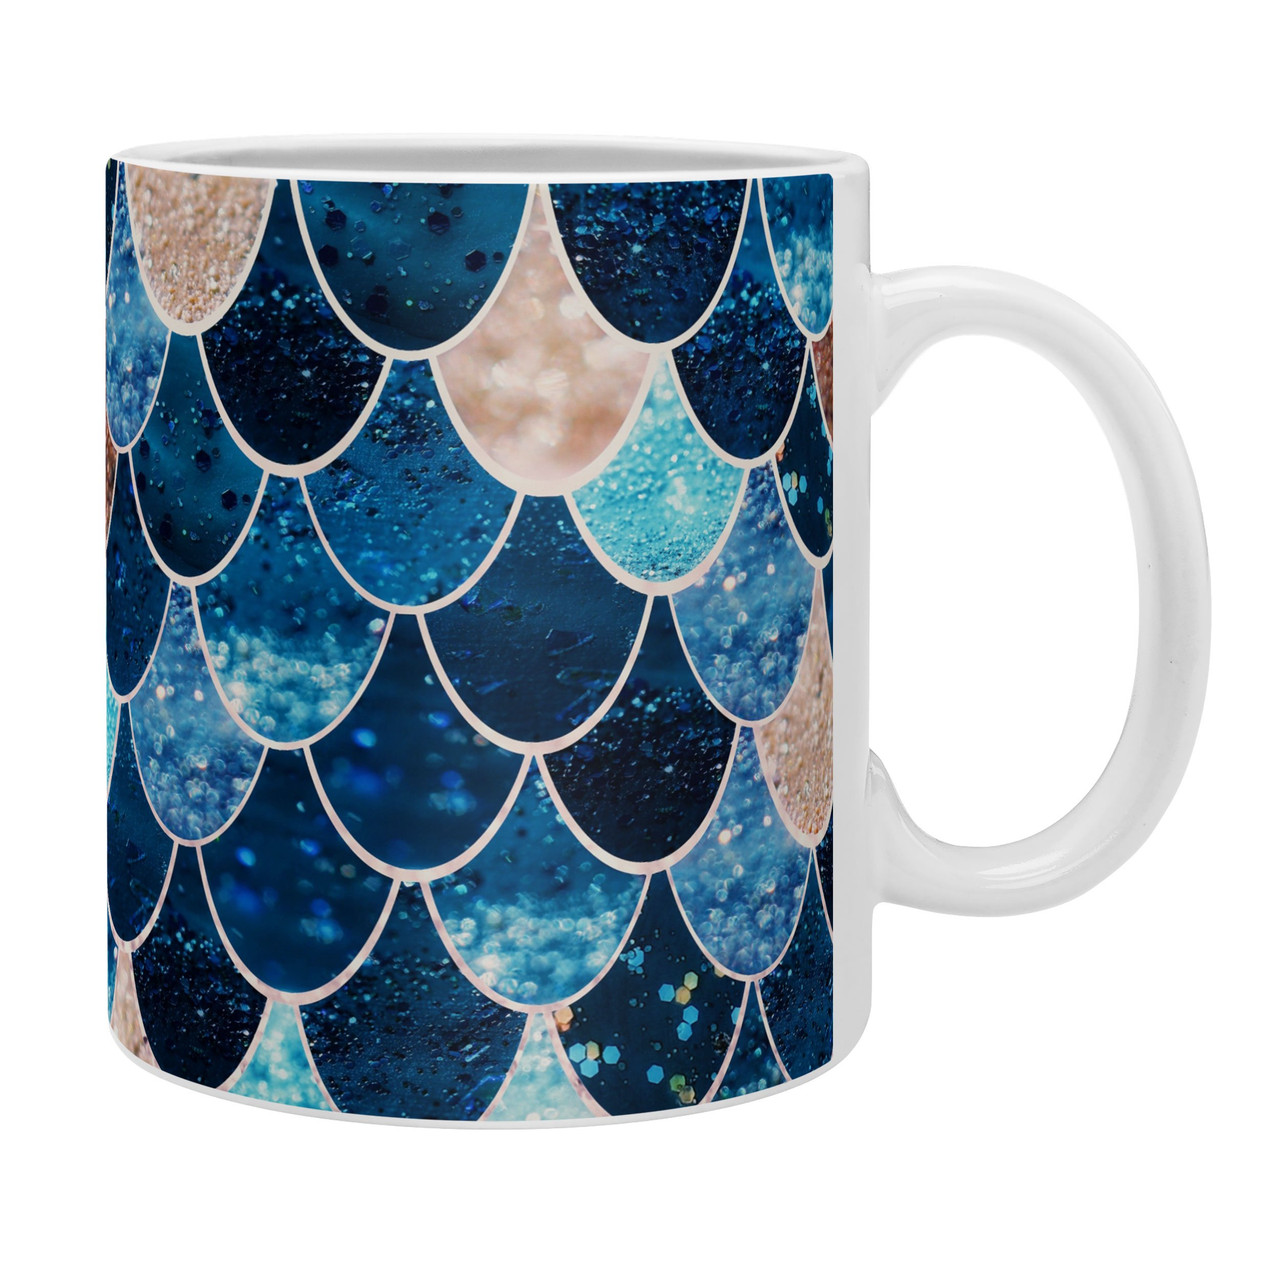 Real Blue and Gold Mermaid Coffee Mugs -Set of 4